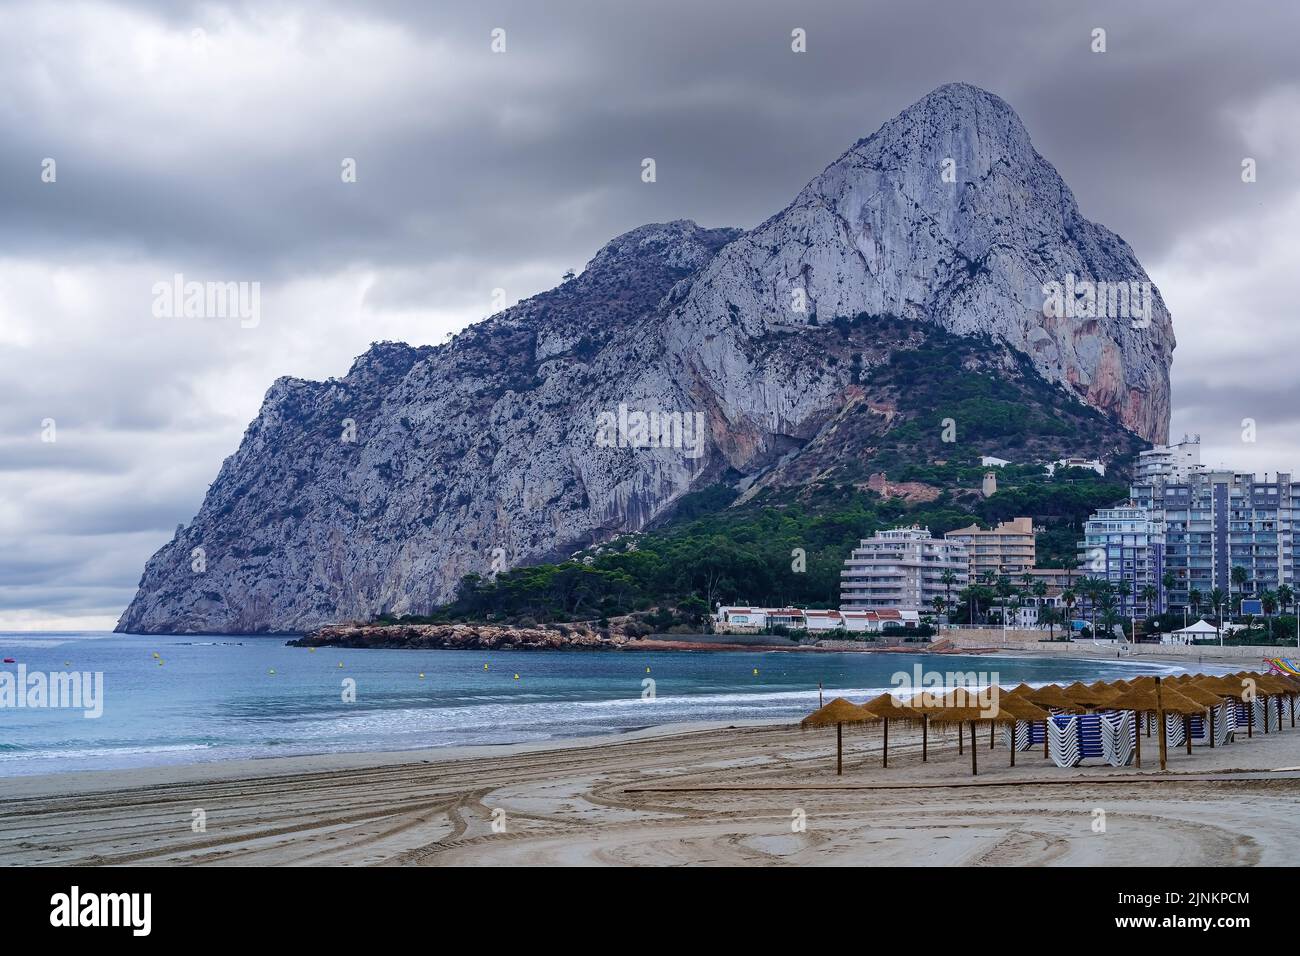 Promenade calpe alicante hi-res stock photography and images - Alamy